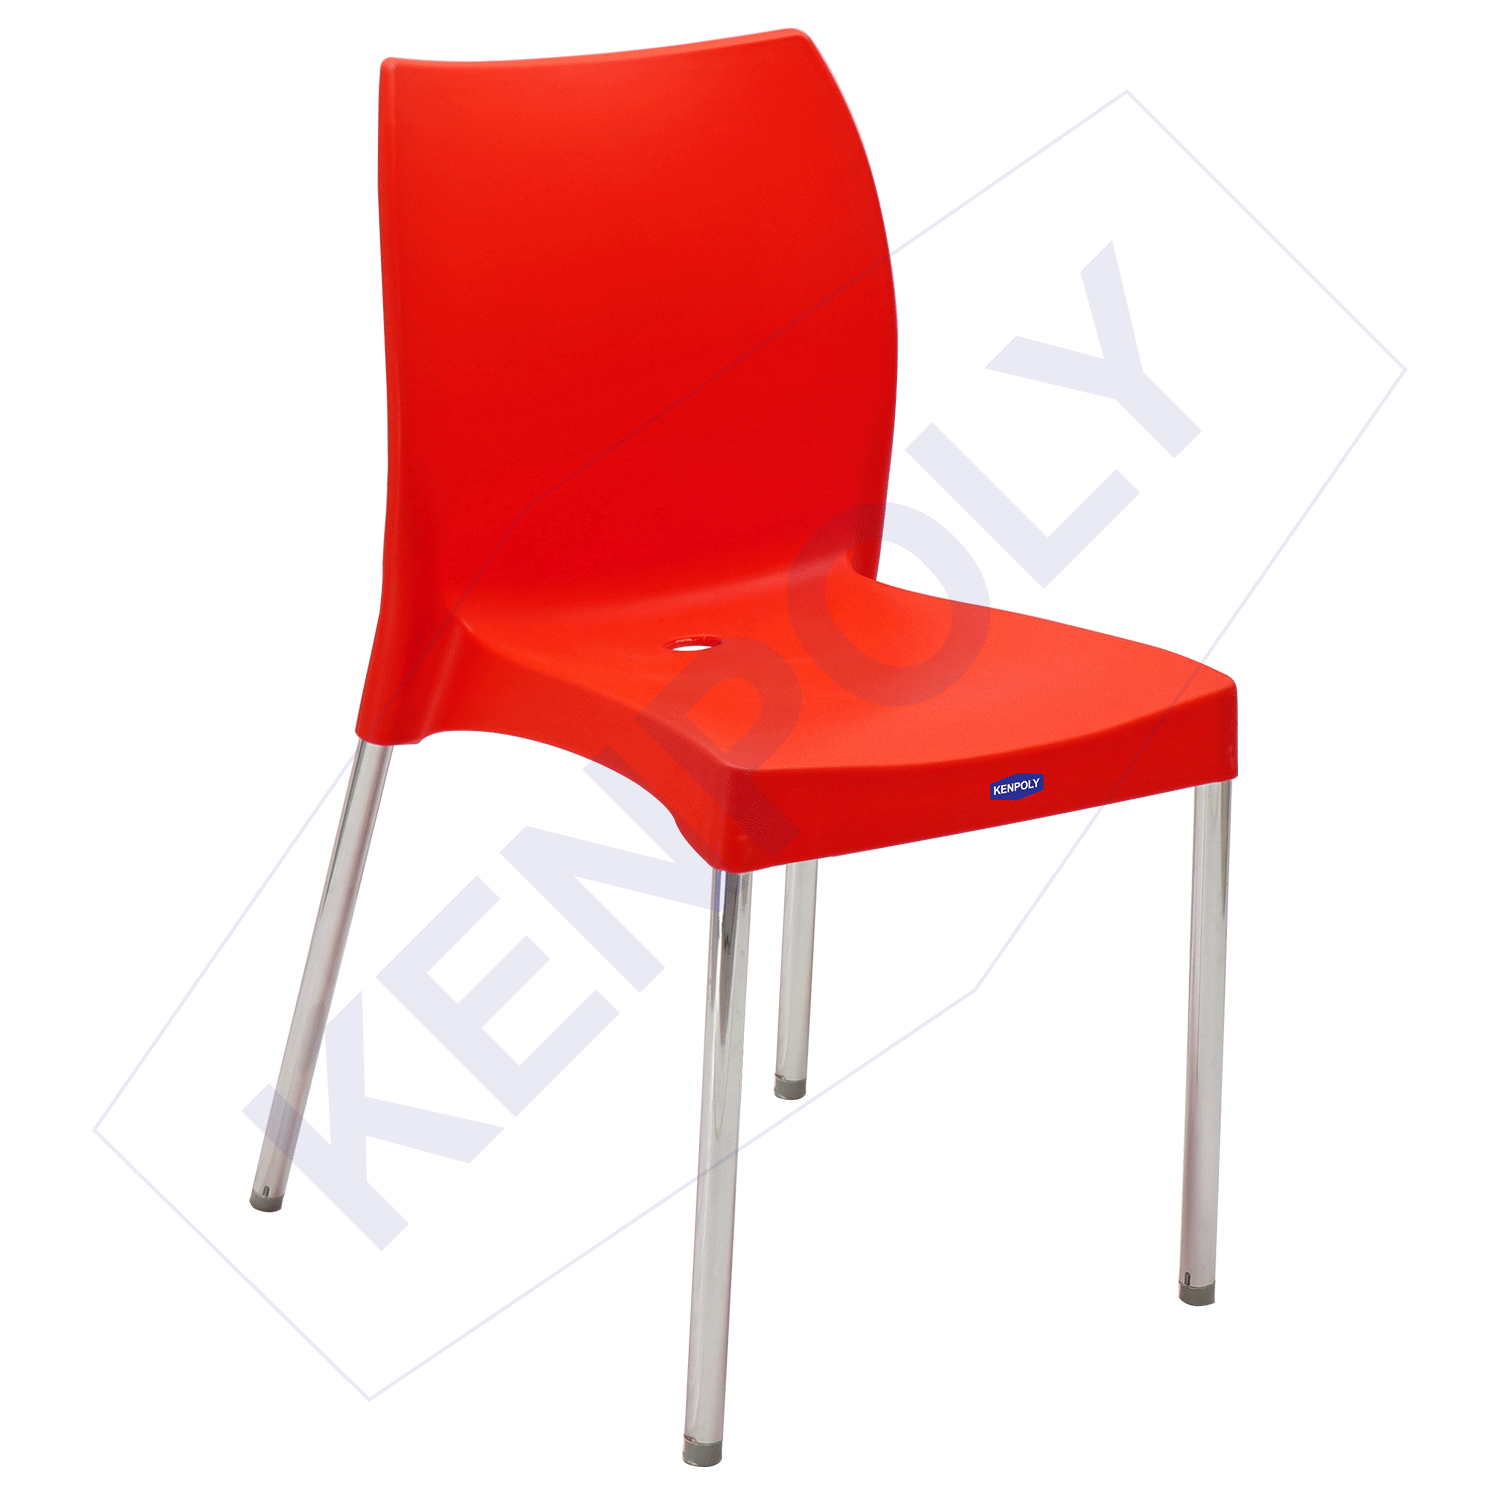 chairs  kenpoly manufacturers limited